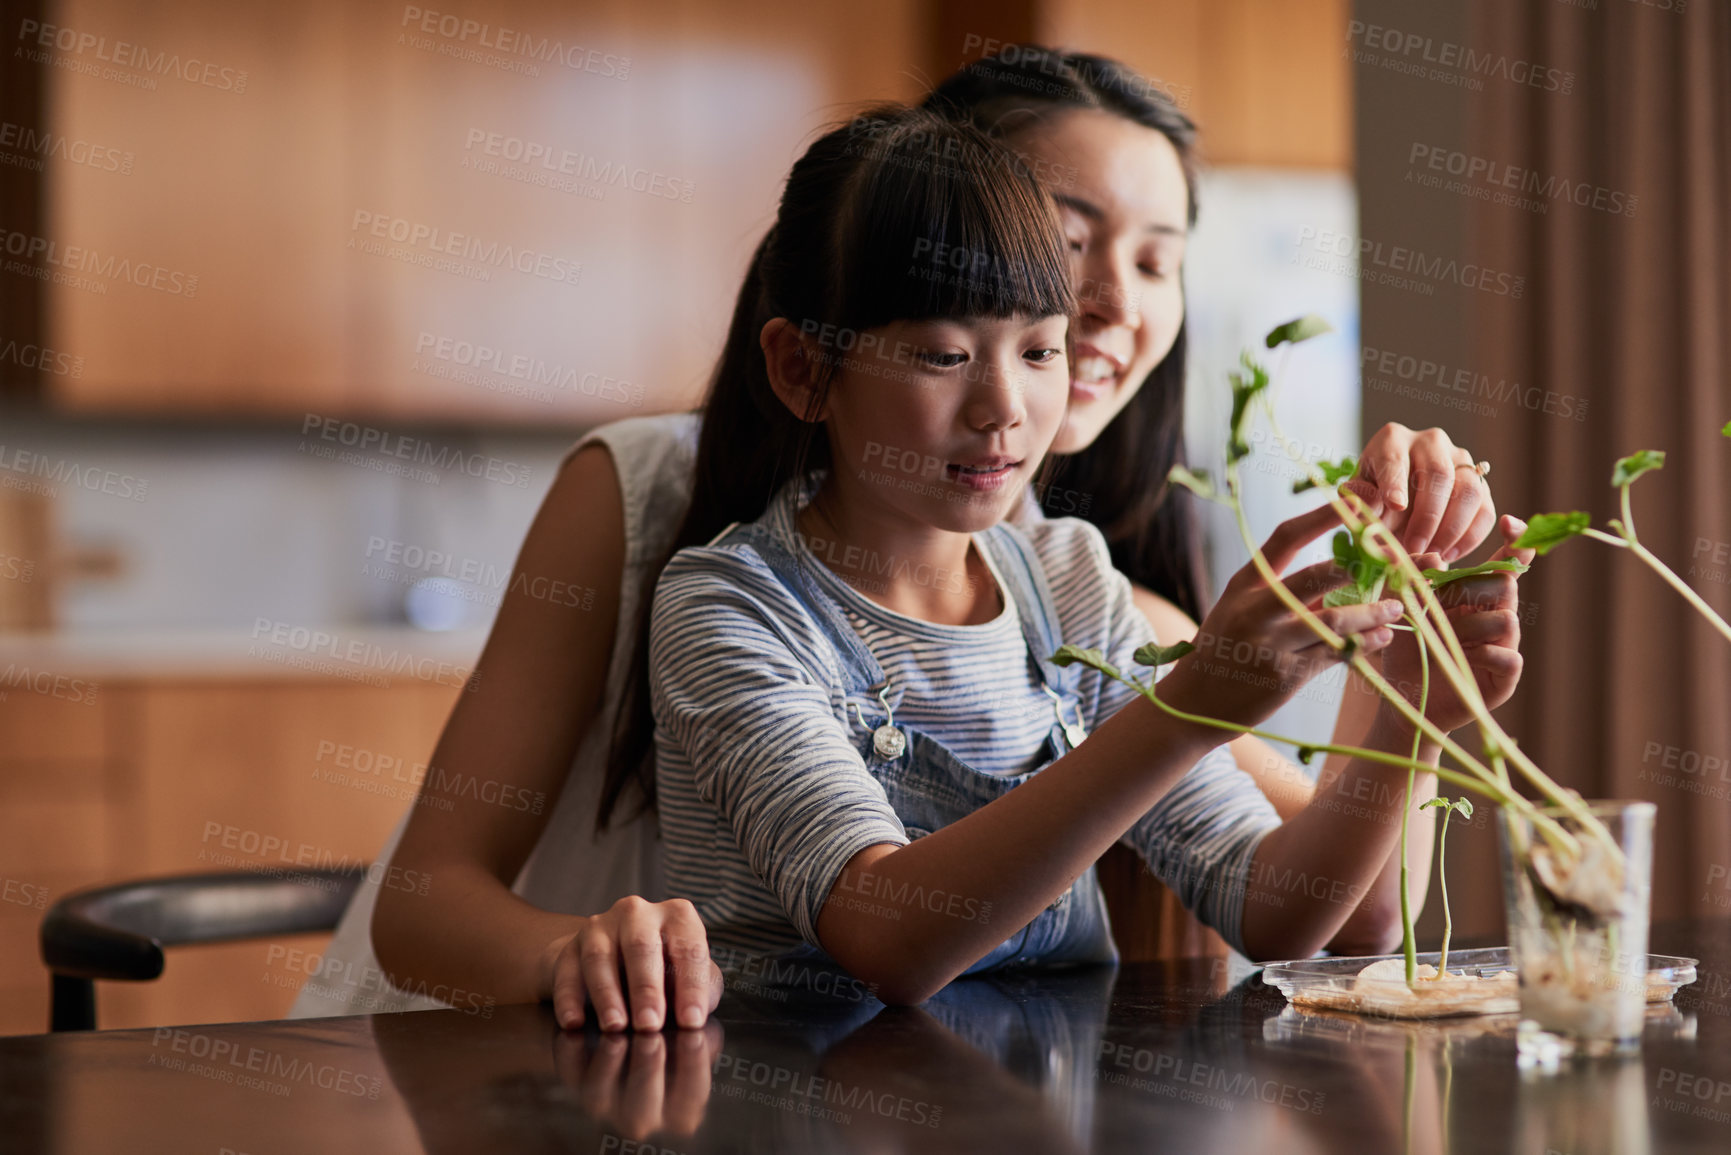 Buy stock photo Shot of a cheerful mother and daughter spending time taking care of plants together inside at home during the day